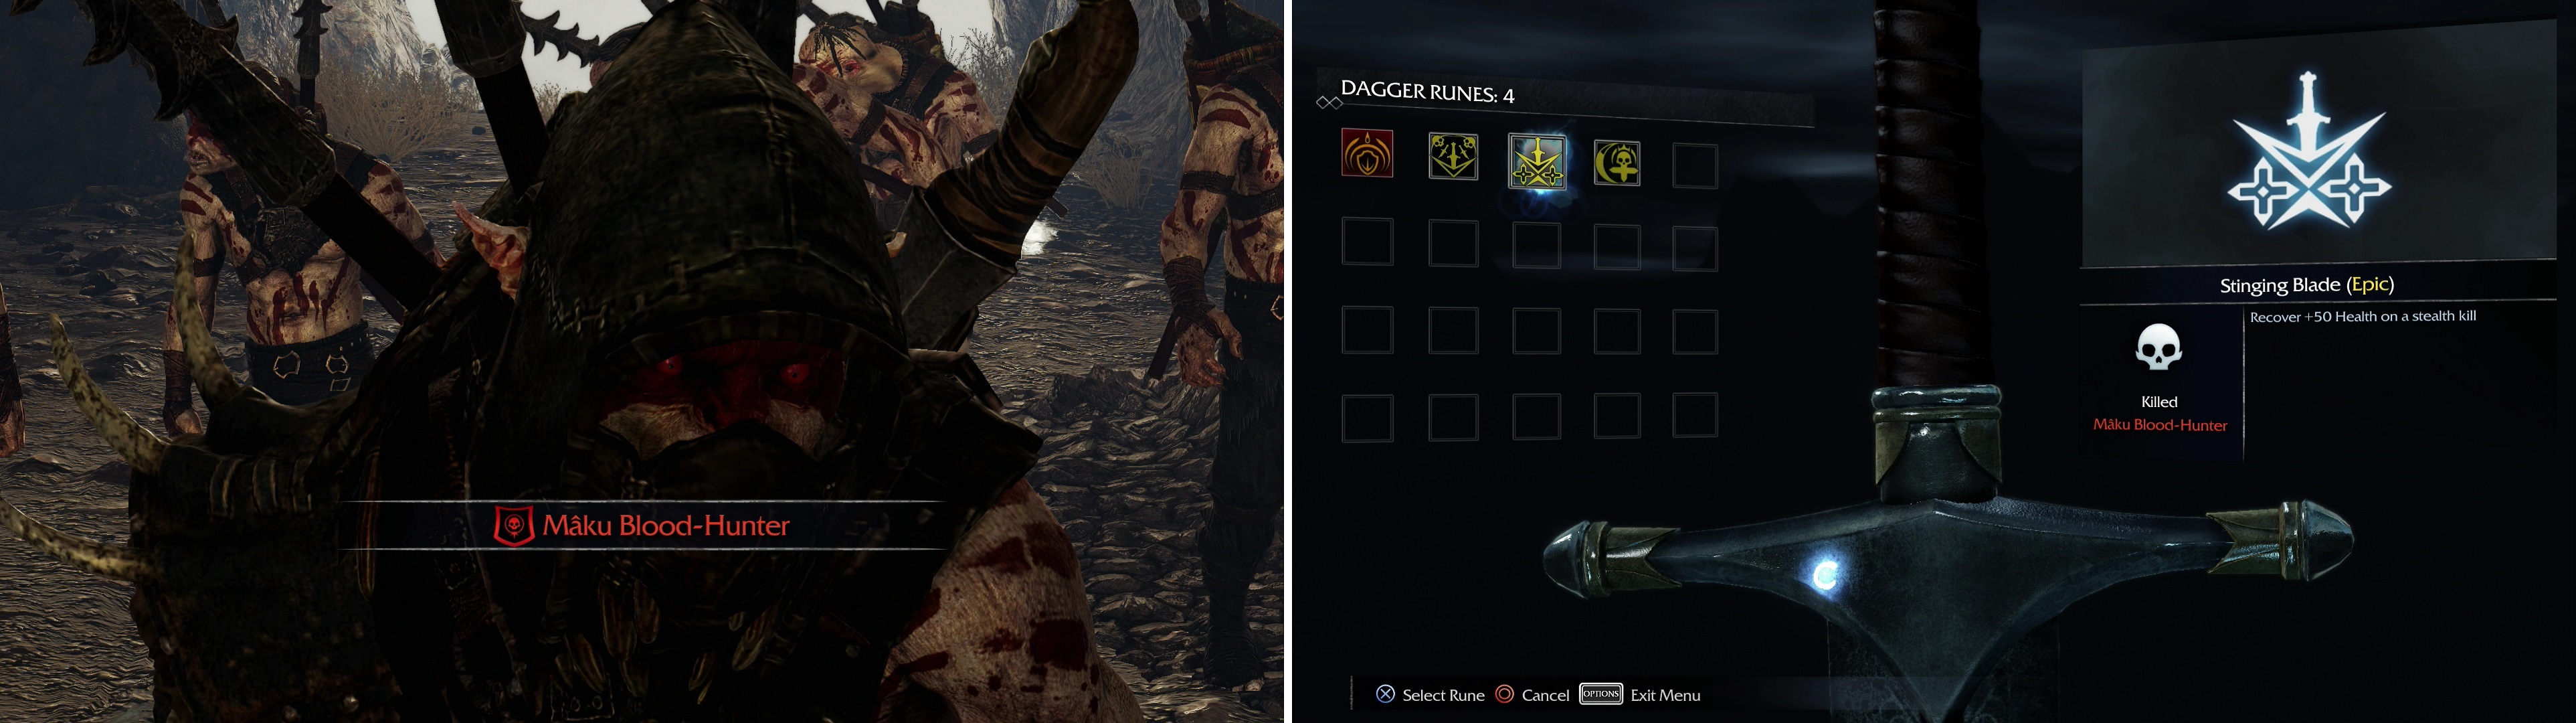 Confront Maku Blood-Hunter (left) and defeat him to earn the "Stinging Blade" Rune (right).